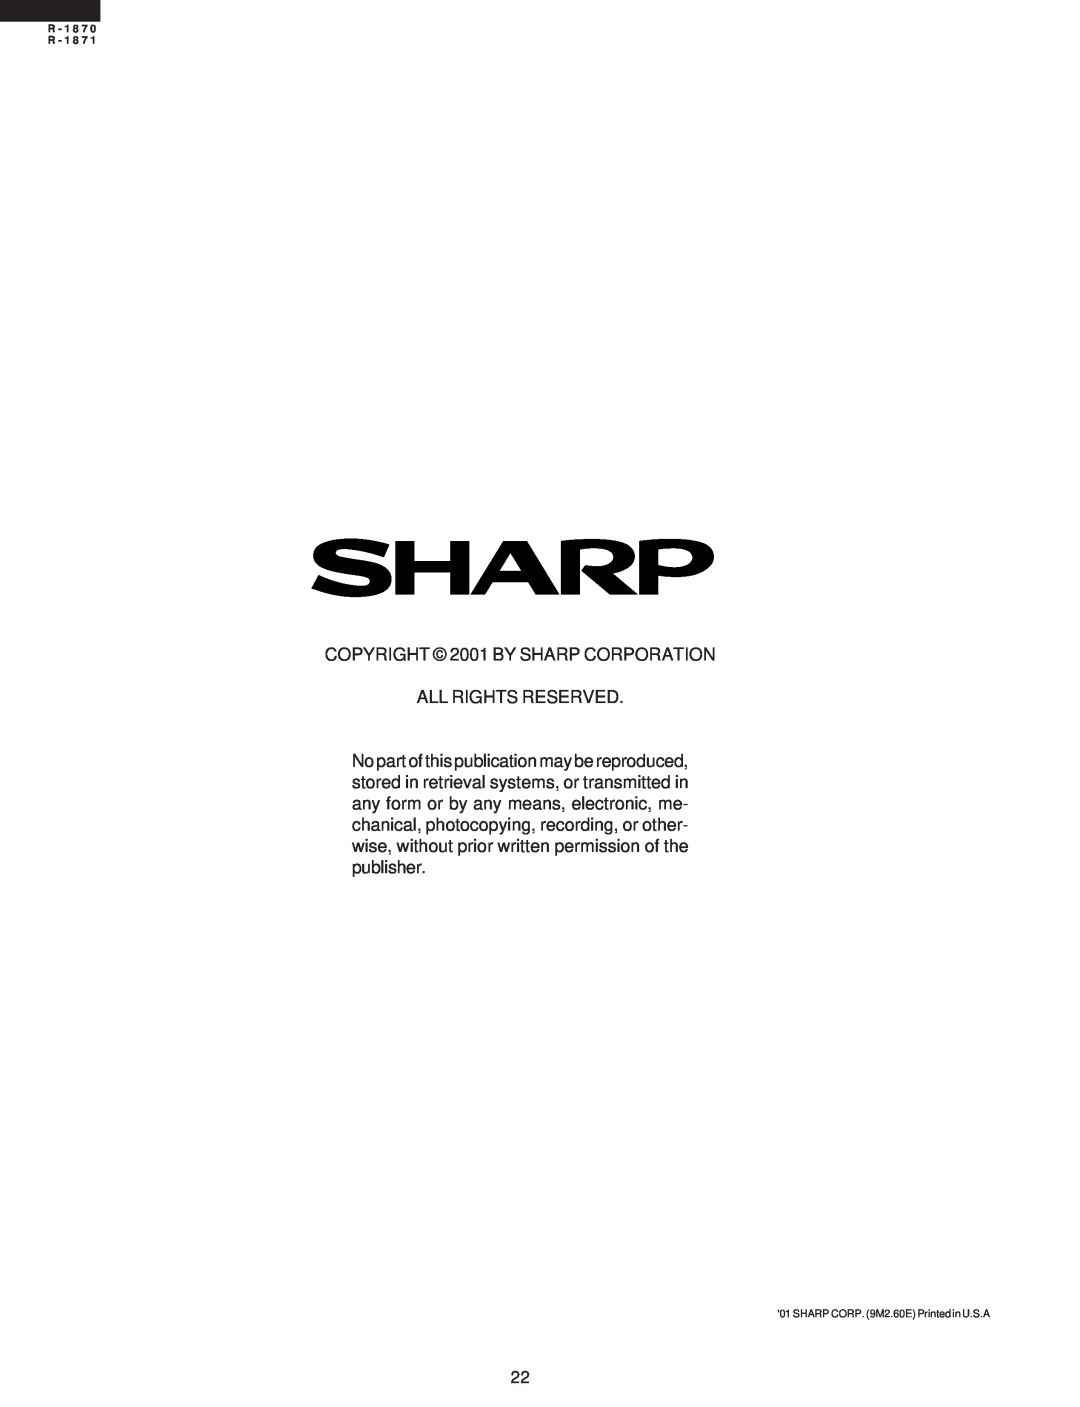 Sharp R-1870 service manual COPYRIGHT 2001 BY SHARP CORPORATION ALL RIGHTS RESERVED, R - 1 8 7 R - 1 8 7 